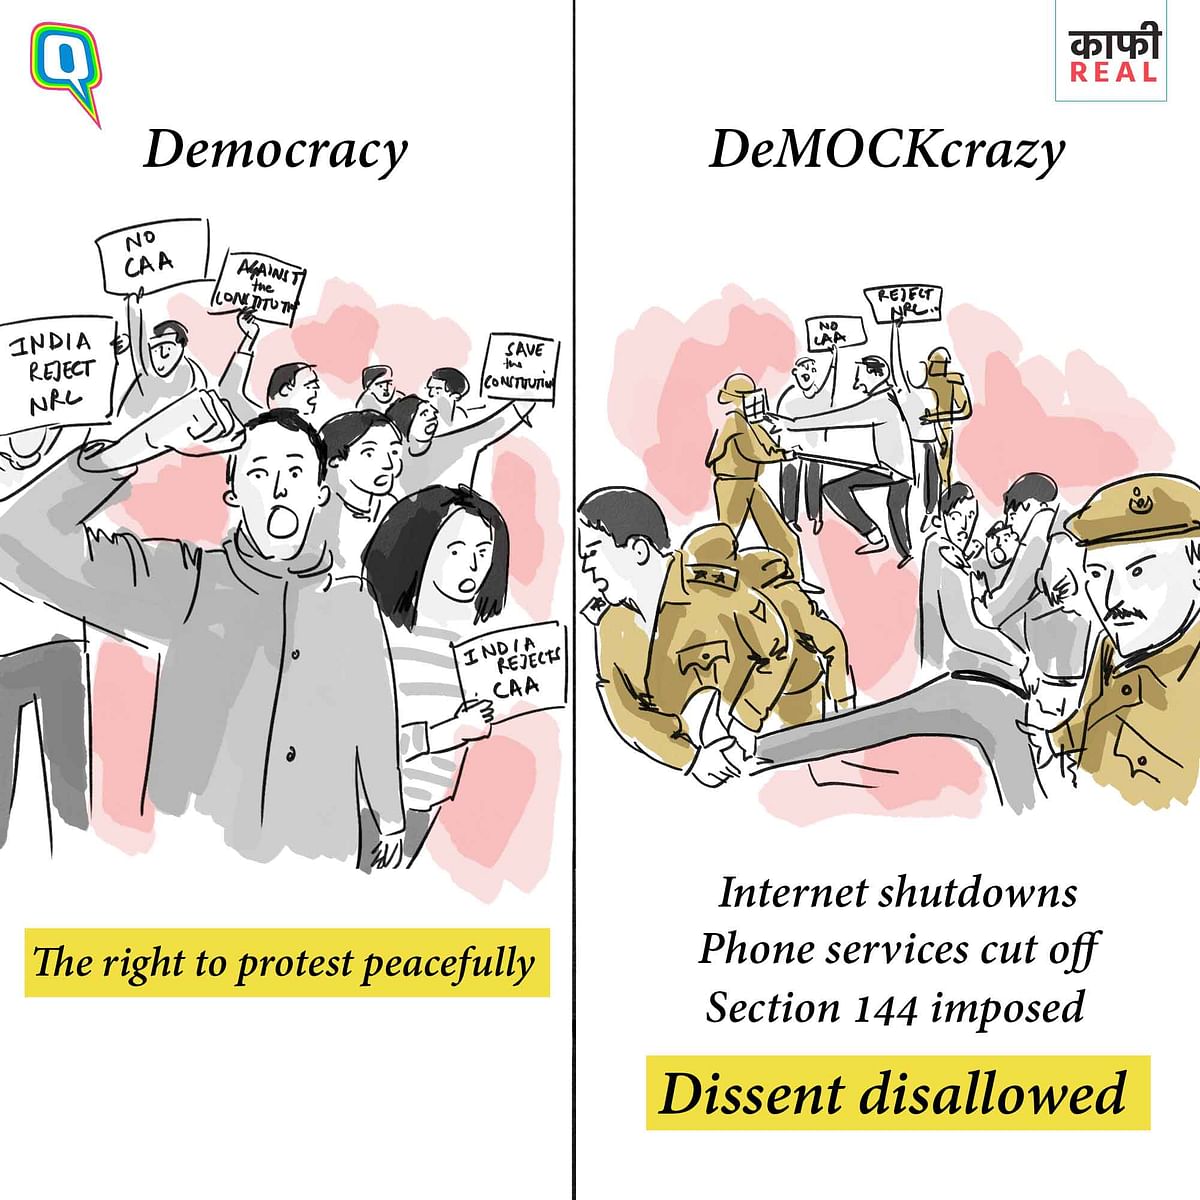 Here’s a simple graphic explaining the difference between a democracy and a ‘demockcrazy’.